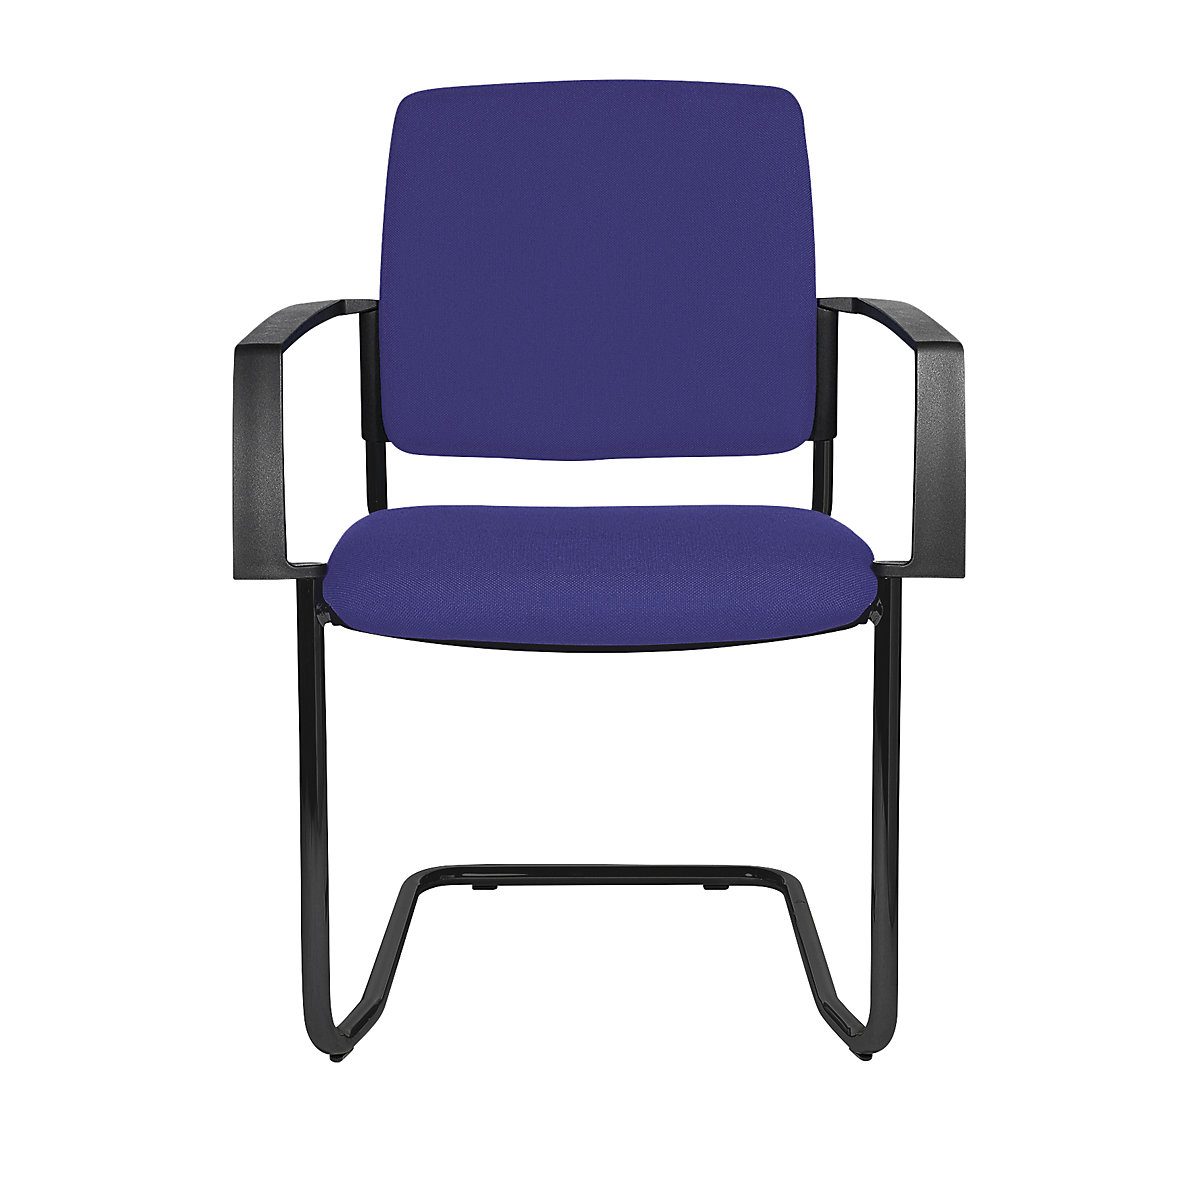 Padded stacking chair – Topstar, cantilever chair, pack of 2, black frame, blue upholstery-3